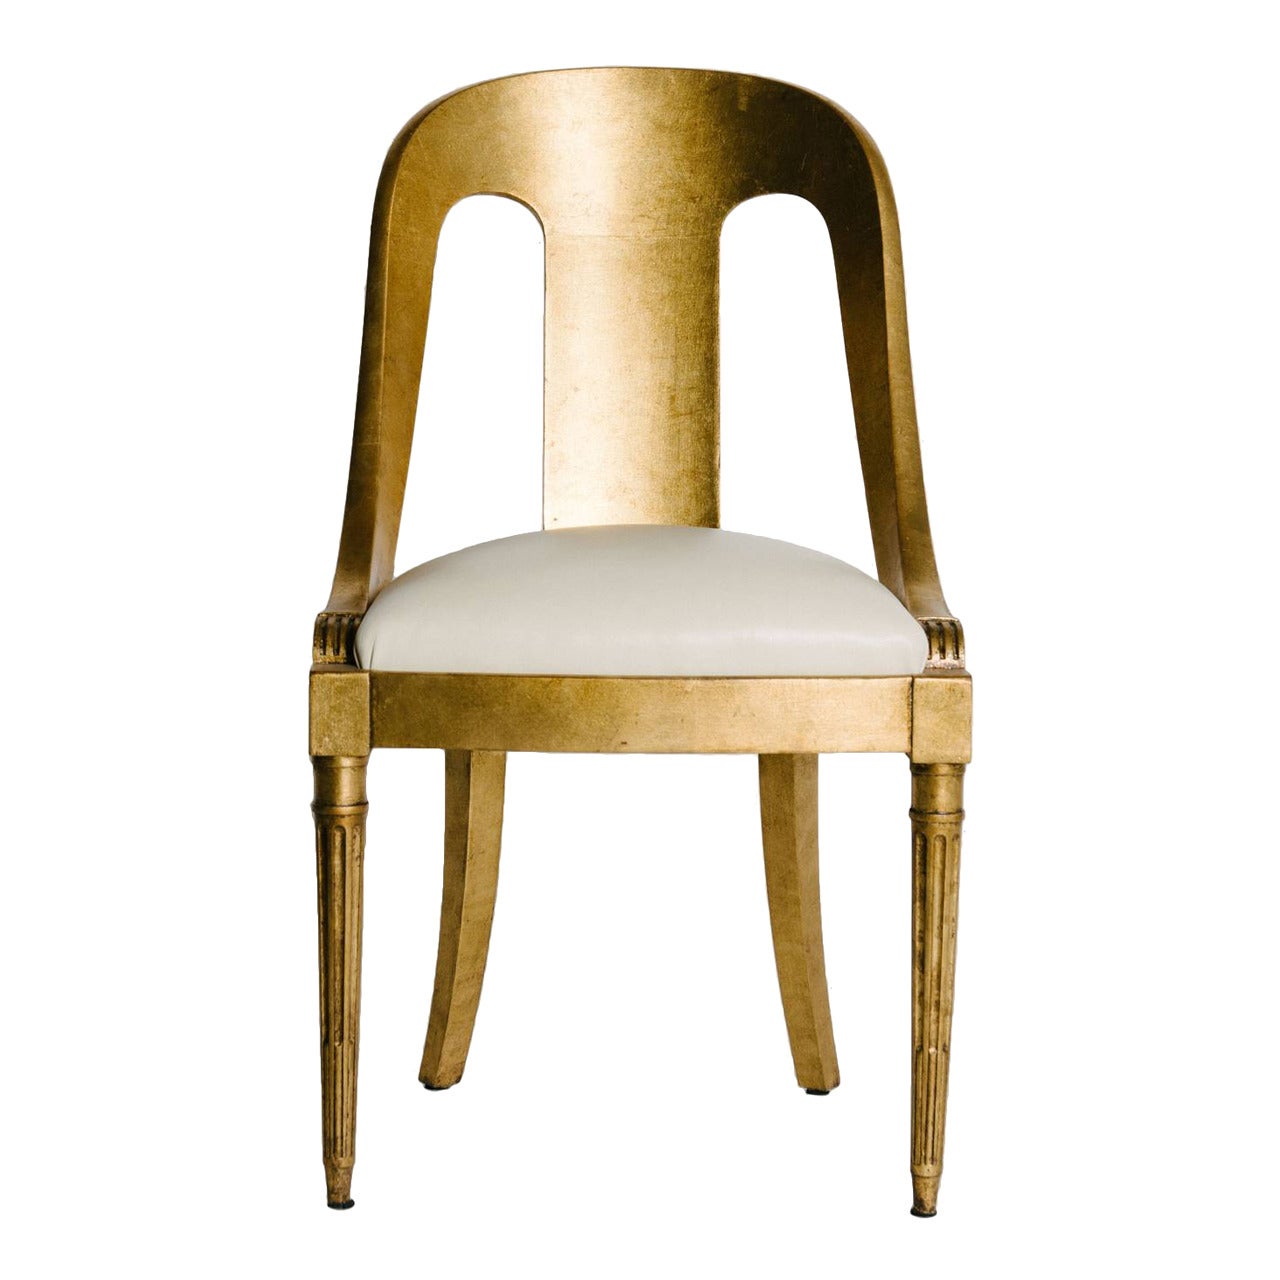 Period Charles X Gilded Chair